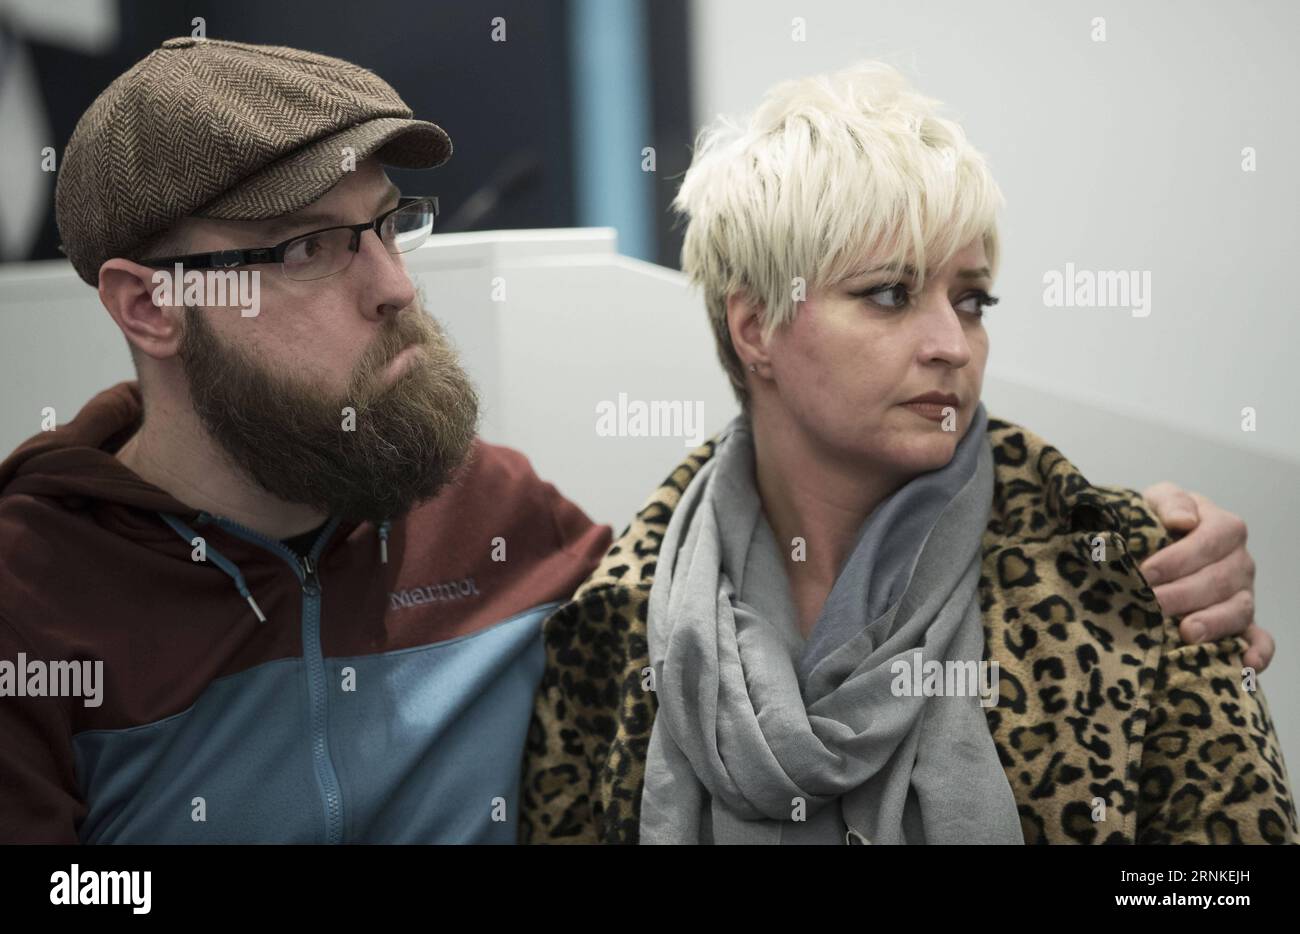 (170327) -- LONDON, March 27, 2017 () -- Sara McFarland (R) and her husband Jason, sister and brother-in-law of Melissa Cochran who was injured and whose husband Kurt Cochran was killed in the London attack, attend a press conference along with other family members at New Scotland Yard in London, Britain, on March 27, 2017. () -UK OUT- BRITAIN-LONDON-LONDON ATTACK-PRESS CONFERENCE Xinhua PUBLICATIONxNOTxINxCHN   London March 27 2017 Sara McFarland r and her Husband Jason Sister and Brother in Law of Melissa Cochran Who what Injured and whose Husband Kurt Cochran what KILLED in The London Attac Stock Photo